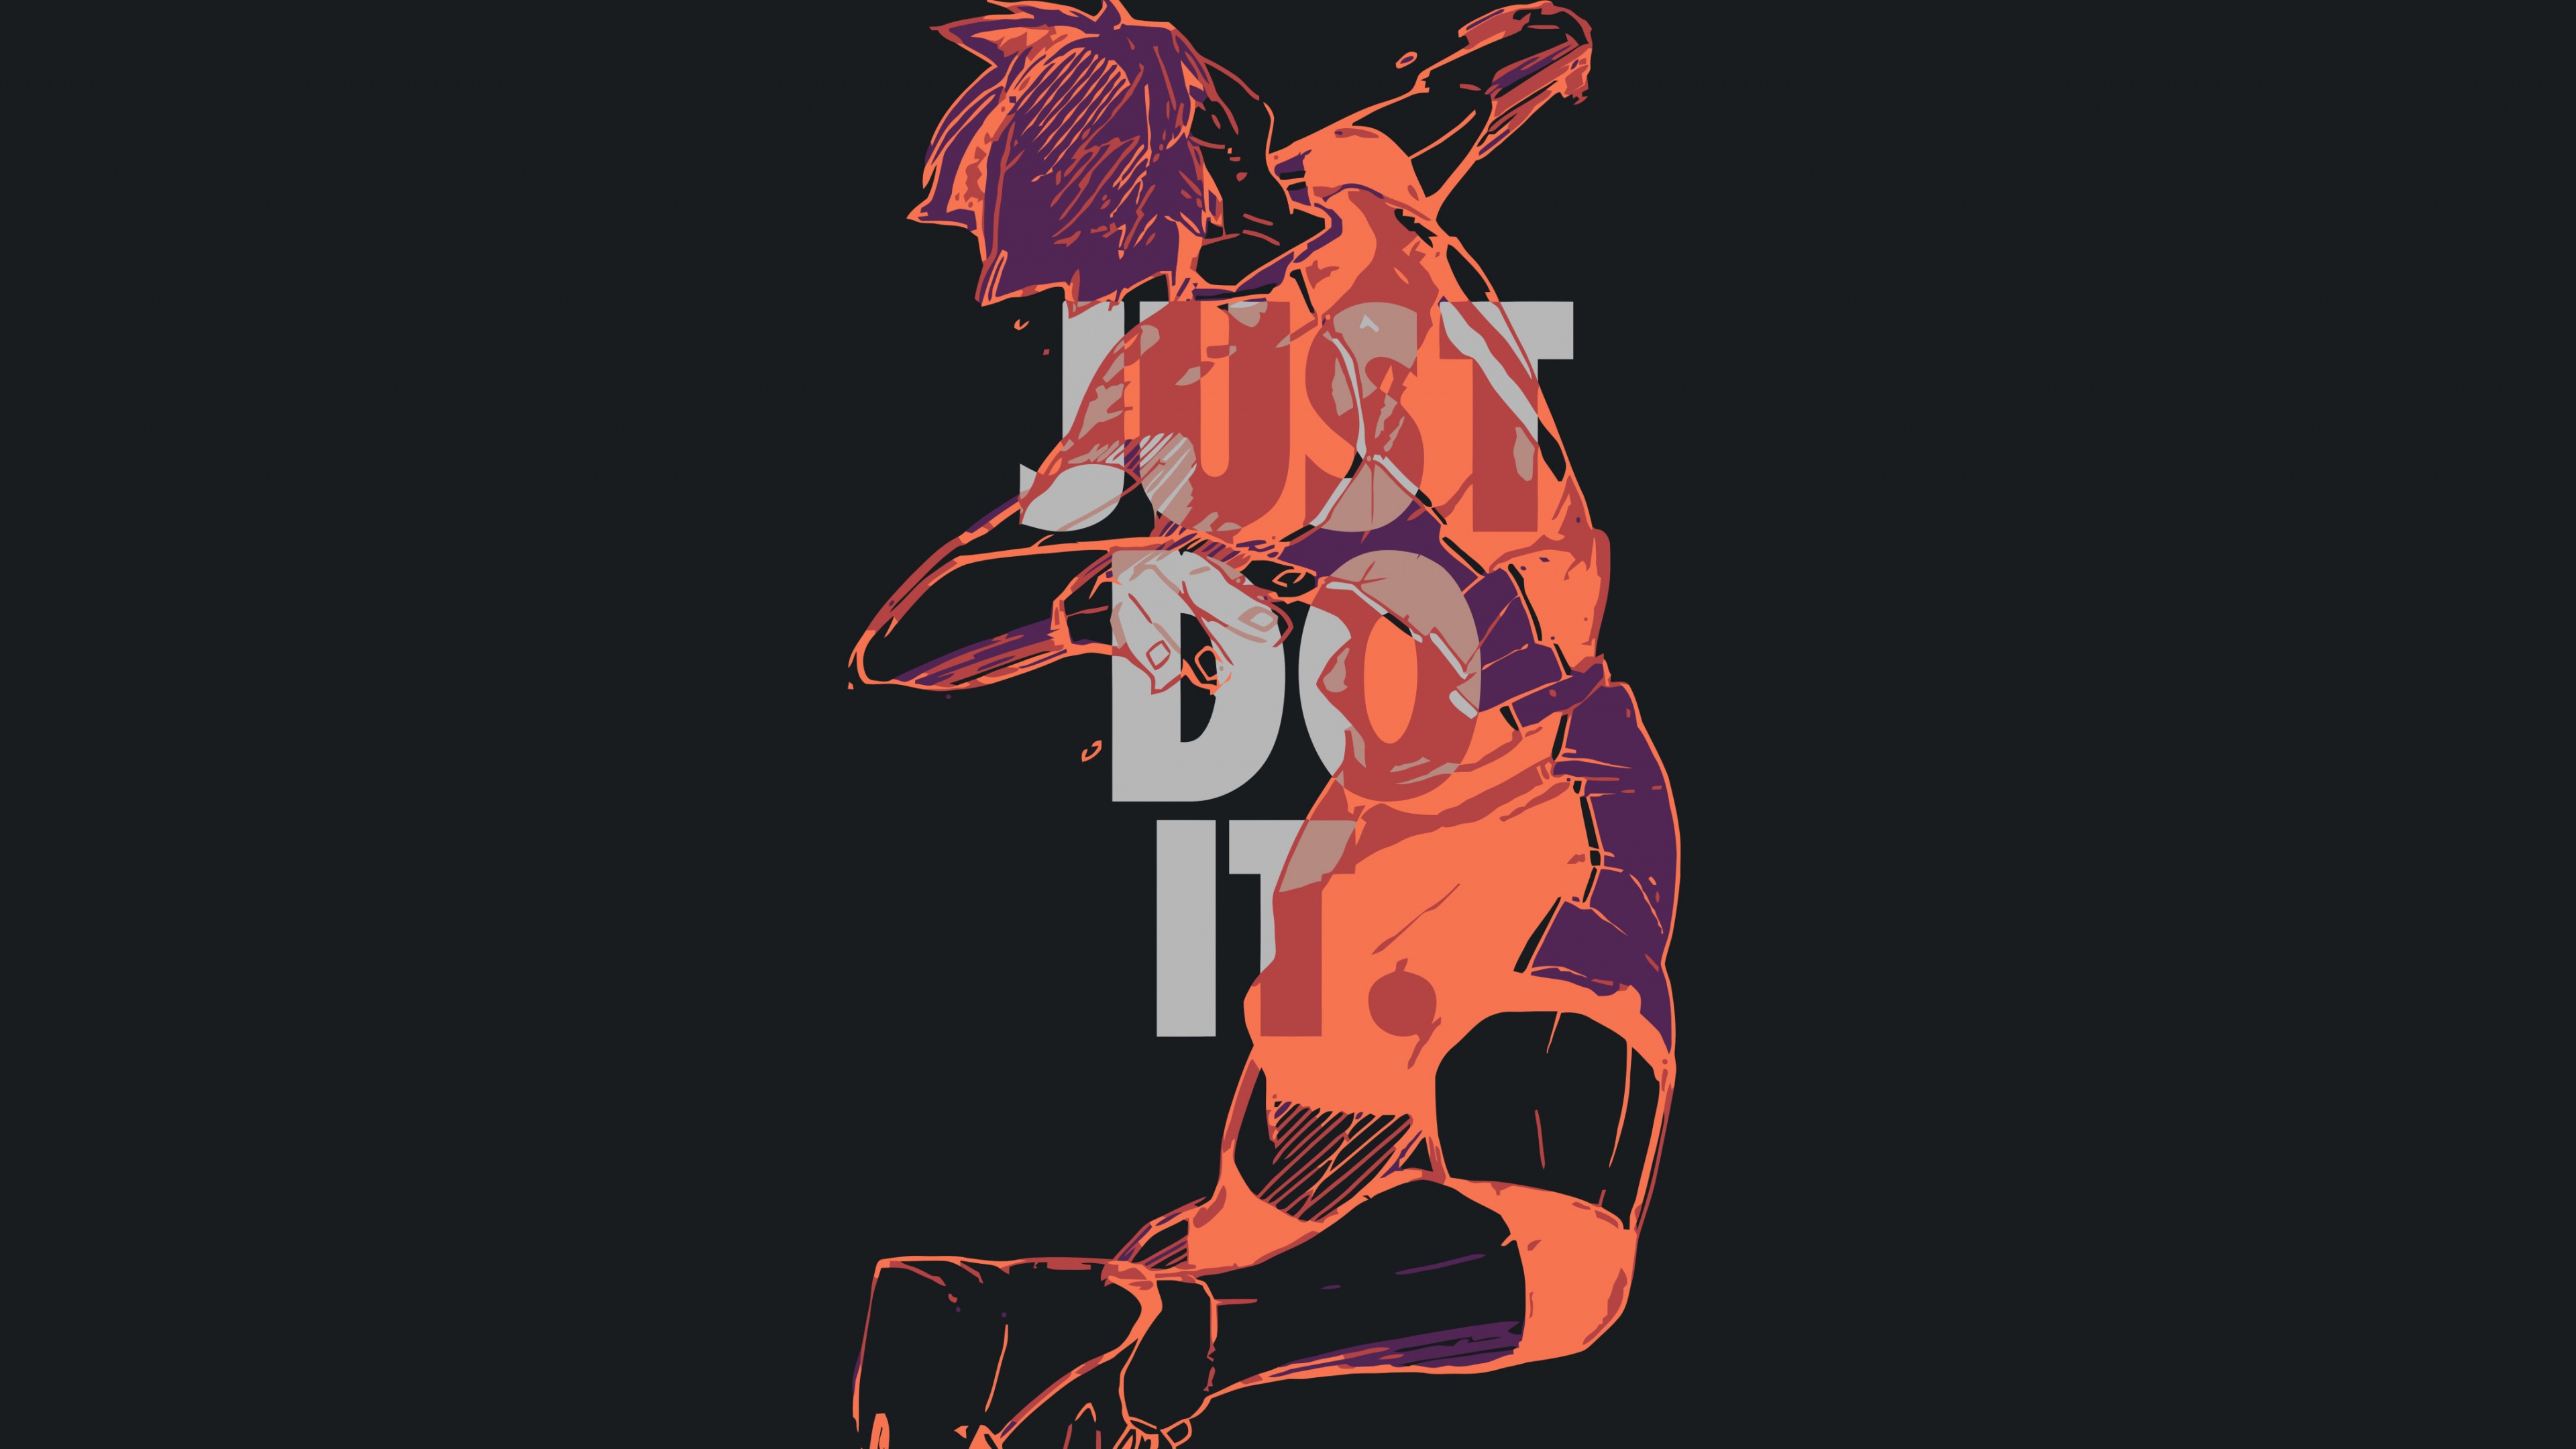 Just Do It Wallpaper 4K, Volleyball player